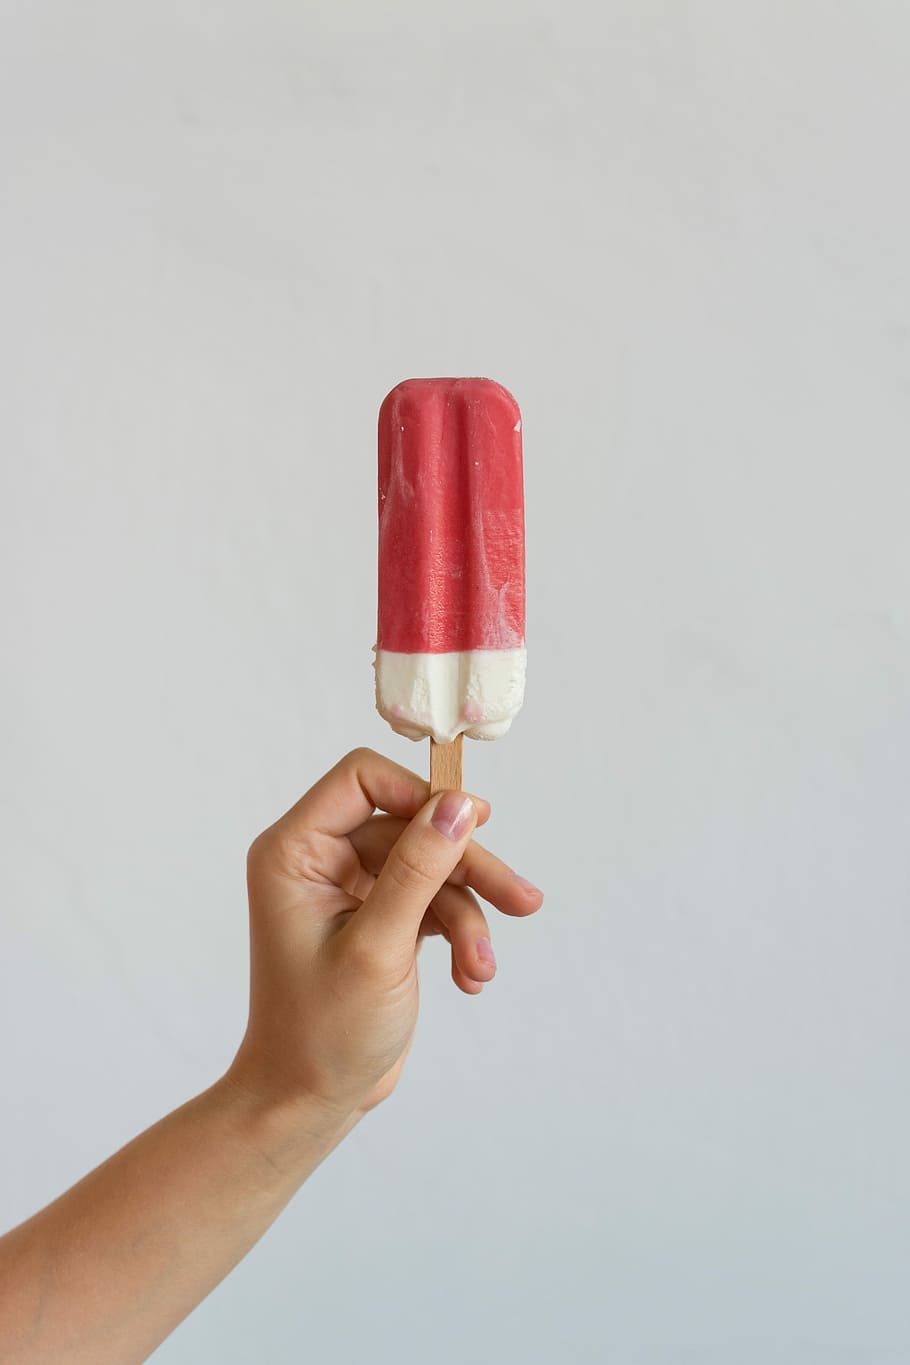 creamy strawberry popsicle, Creamy, strawberry, popsicle, hands, summer, white background, human Hand, flavored Ice, close-up